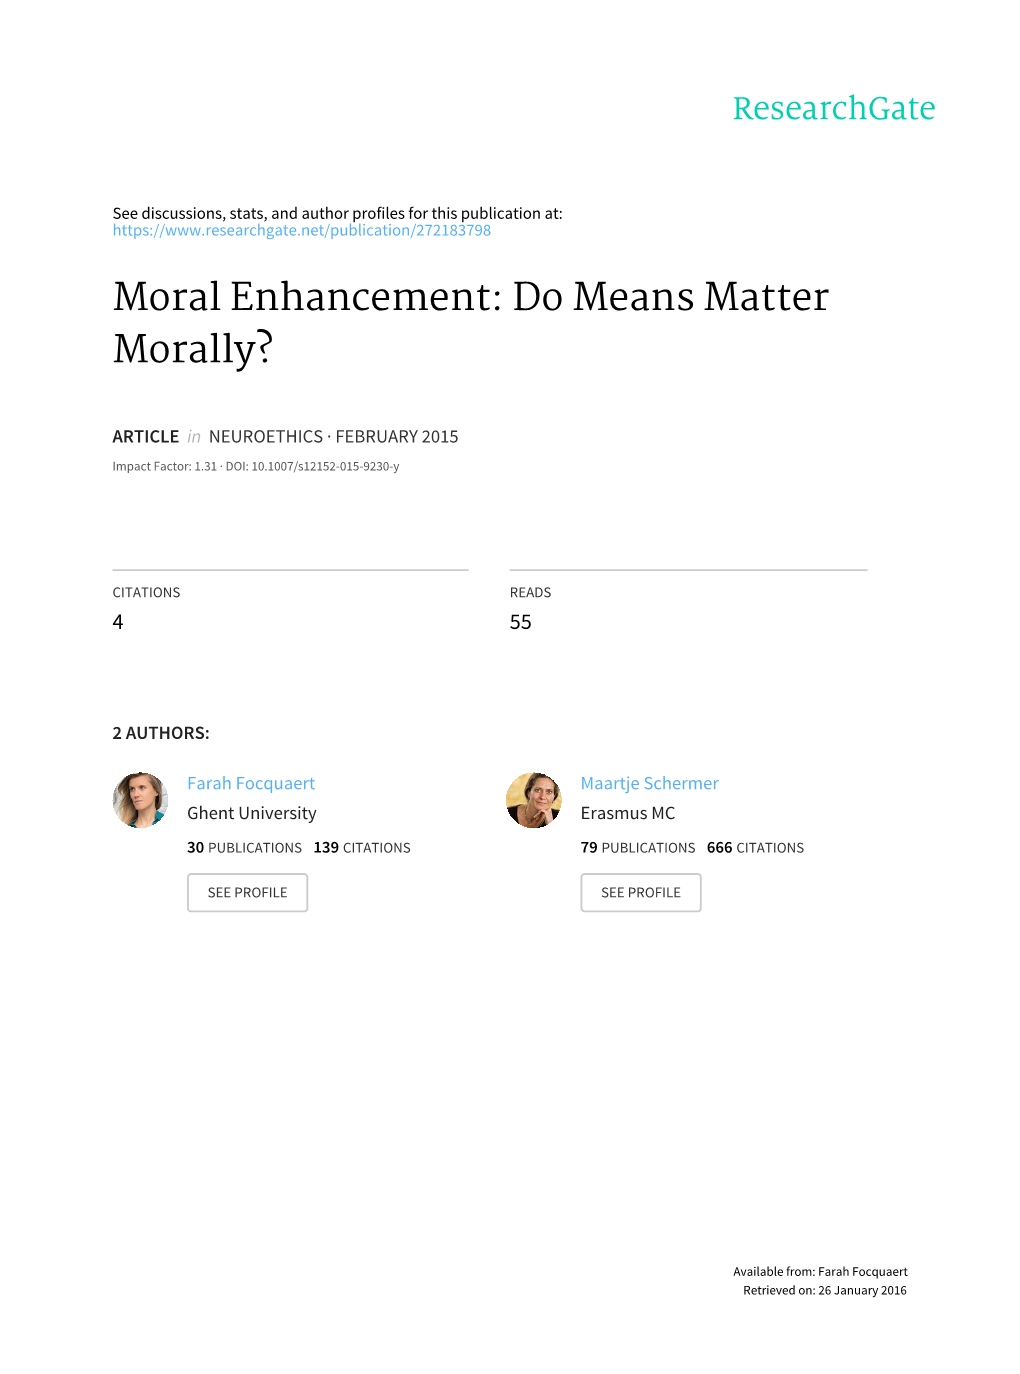 Moral Enhancement: Do Means Matter Morally?